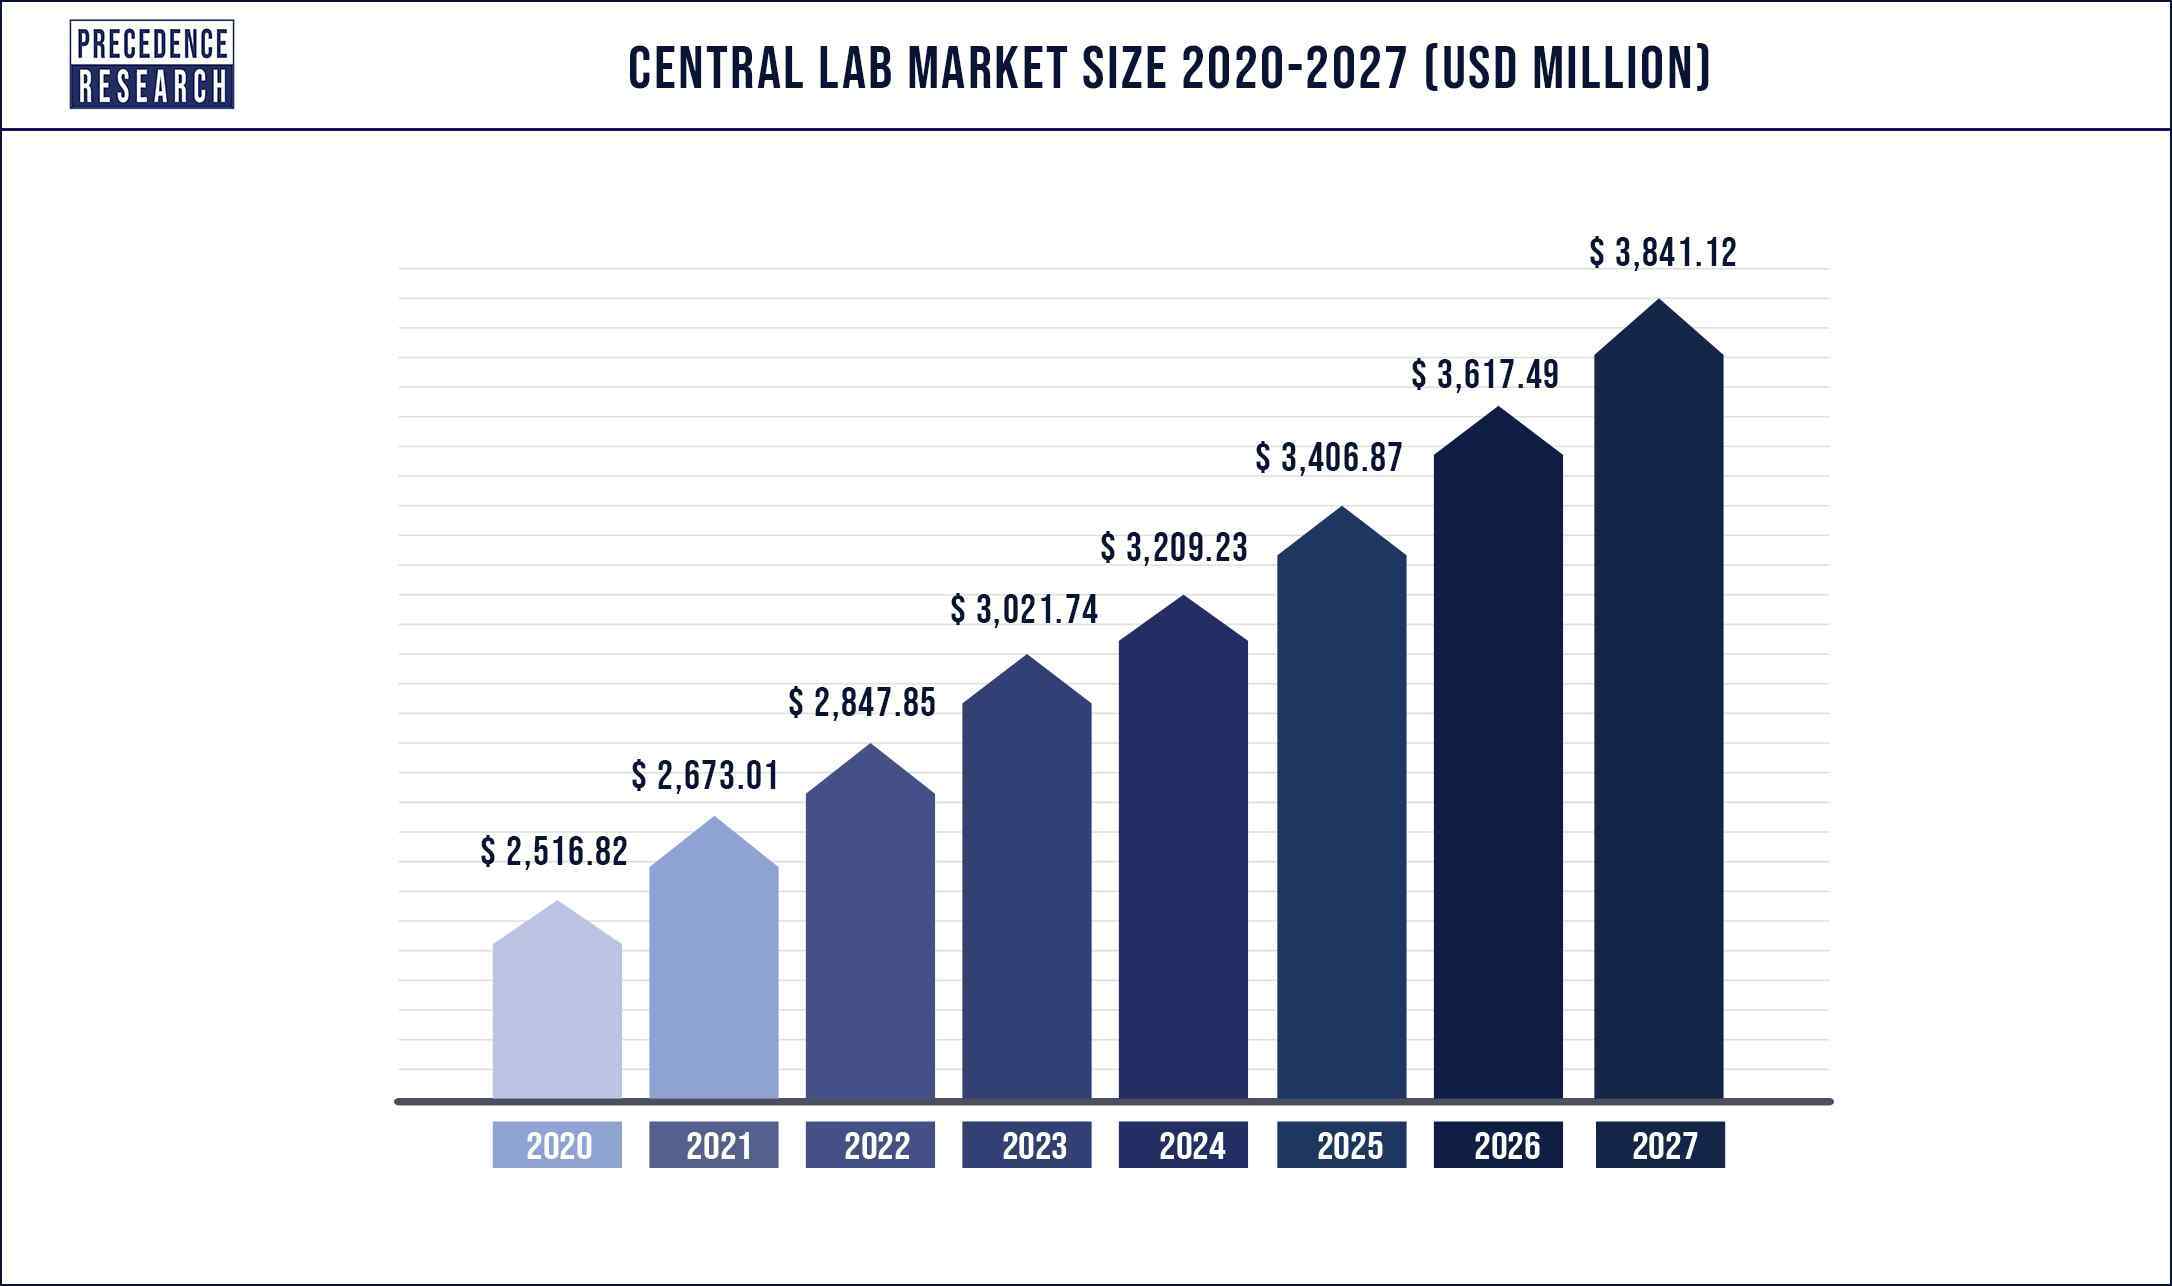 Central Lab Market Rising at 6.2% CAGR to Reach USD 9.73